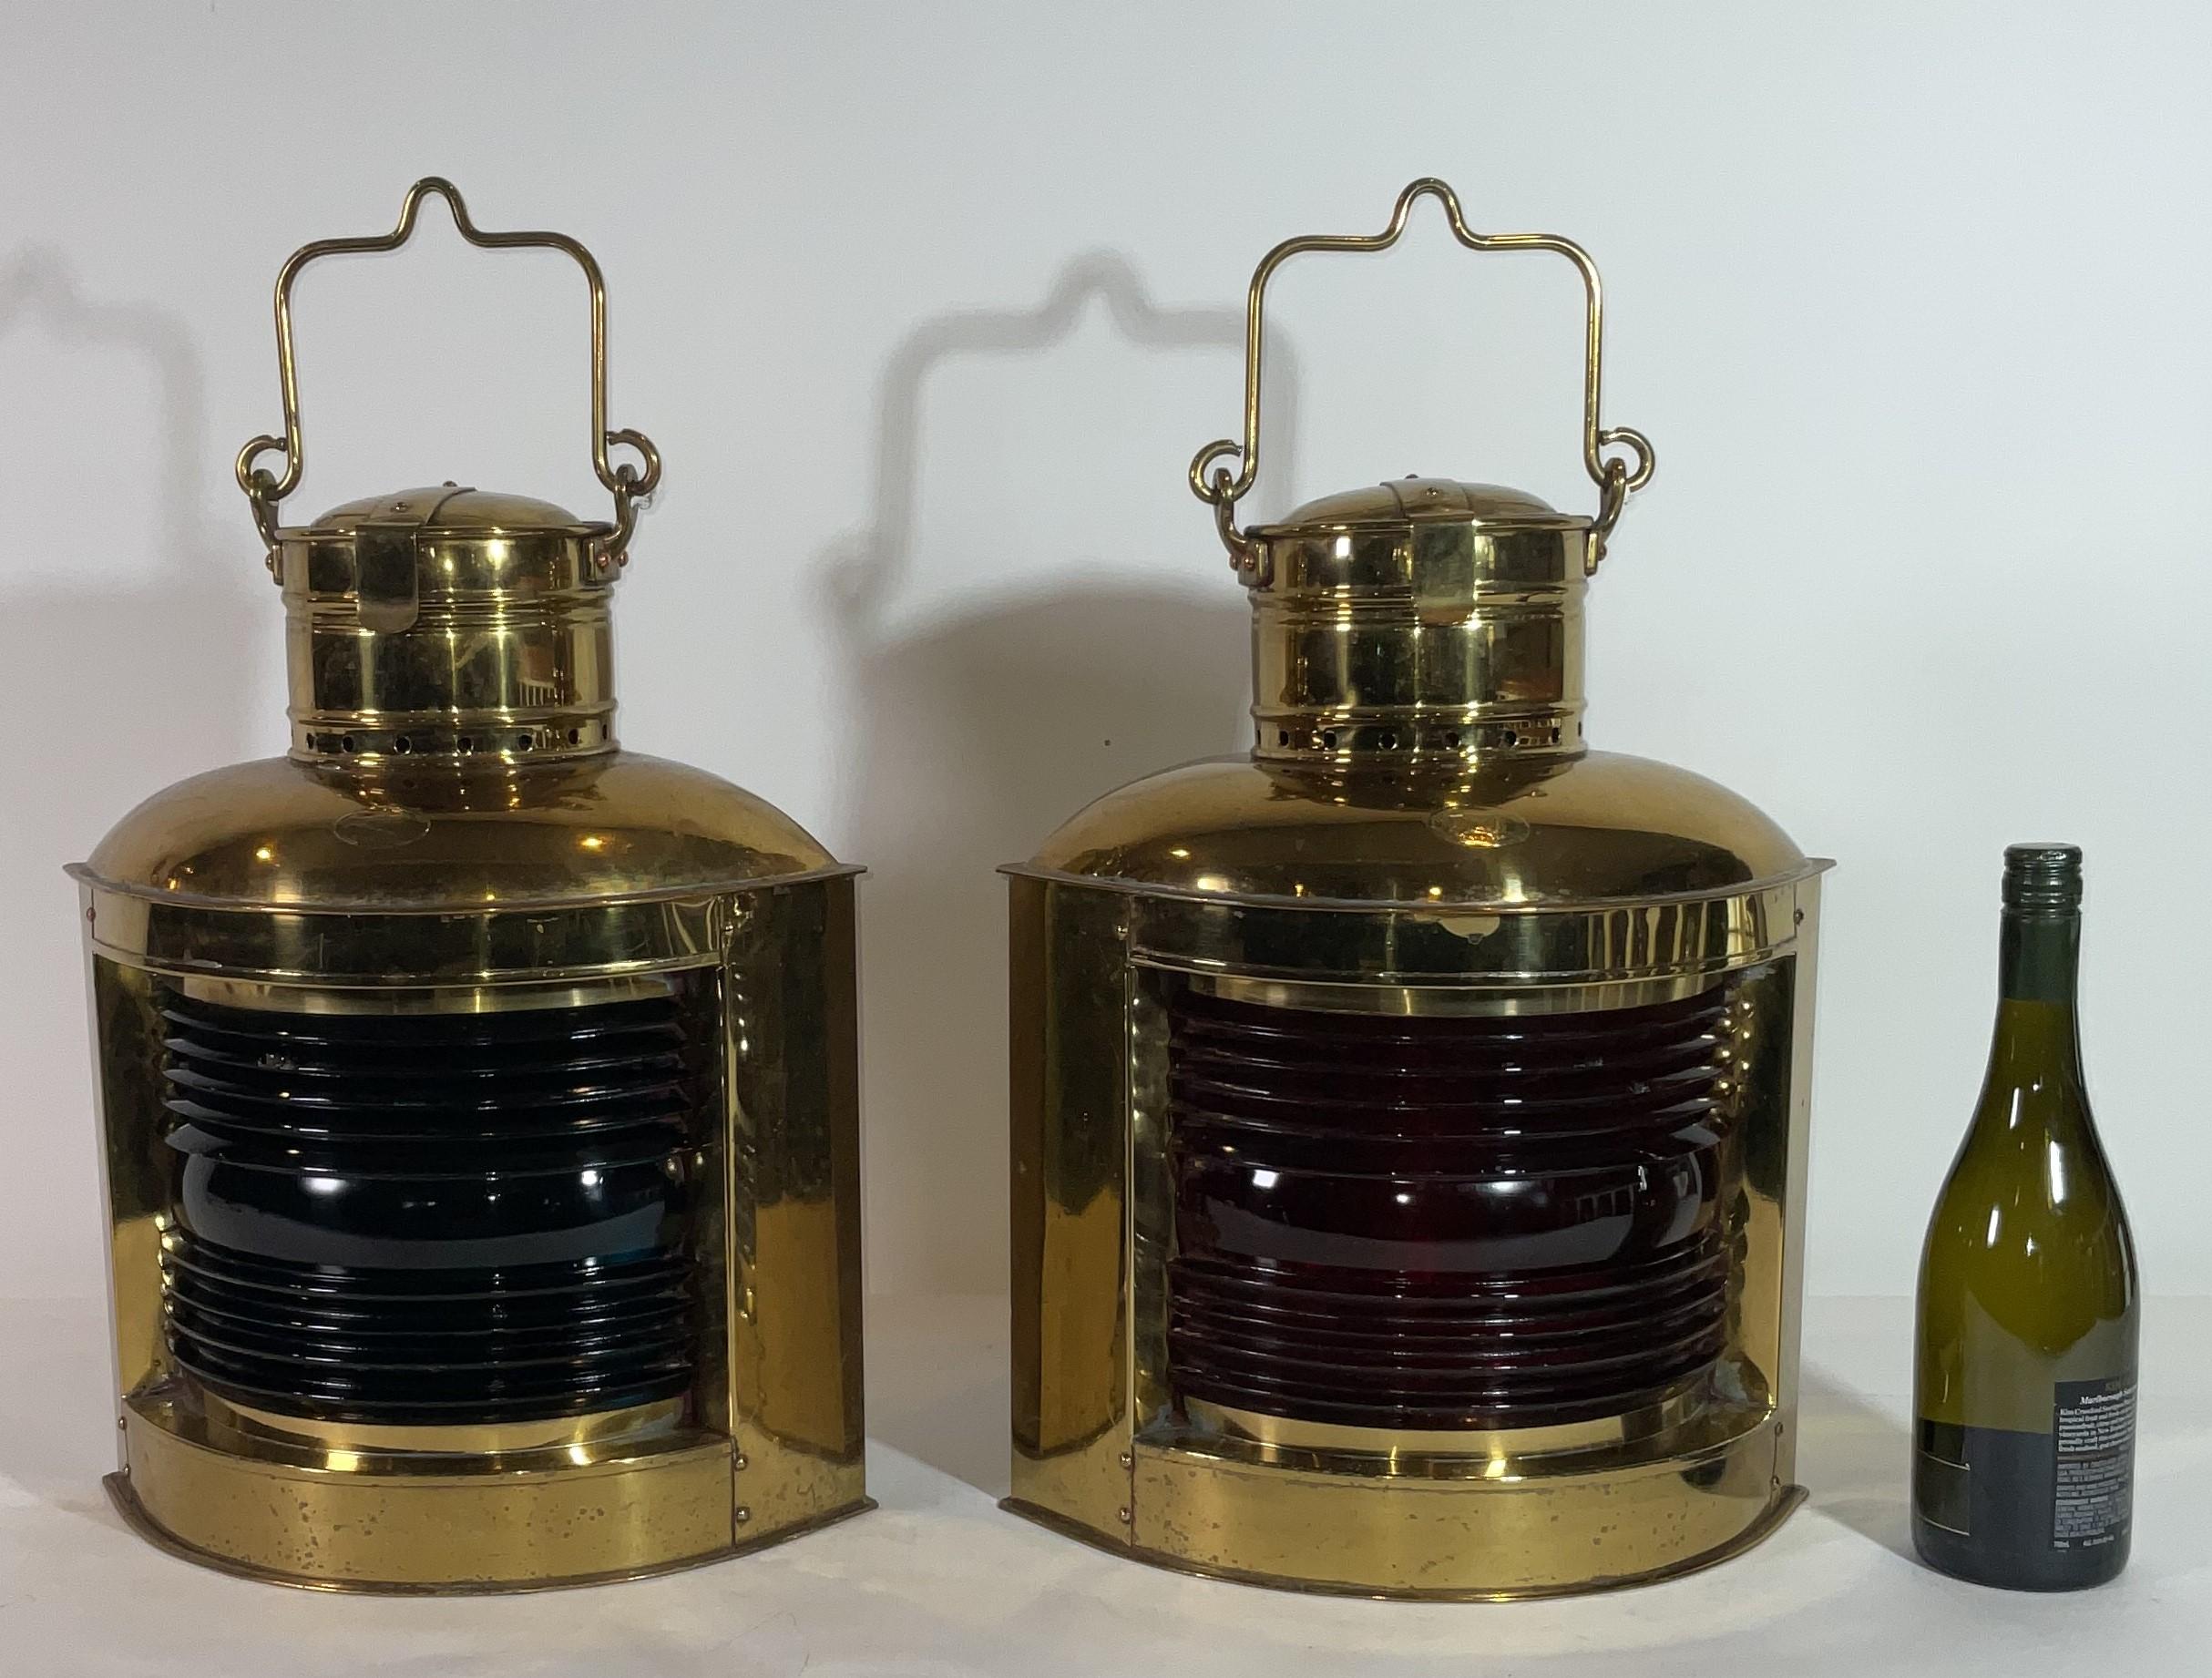 Highly polished solid brass ships port and starboard ships lanterns with fresnel glass lenses. Warm lacquer finish. With Brooklyn makers tags from Perkins Marine Lamp Corporation, 